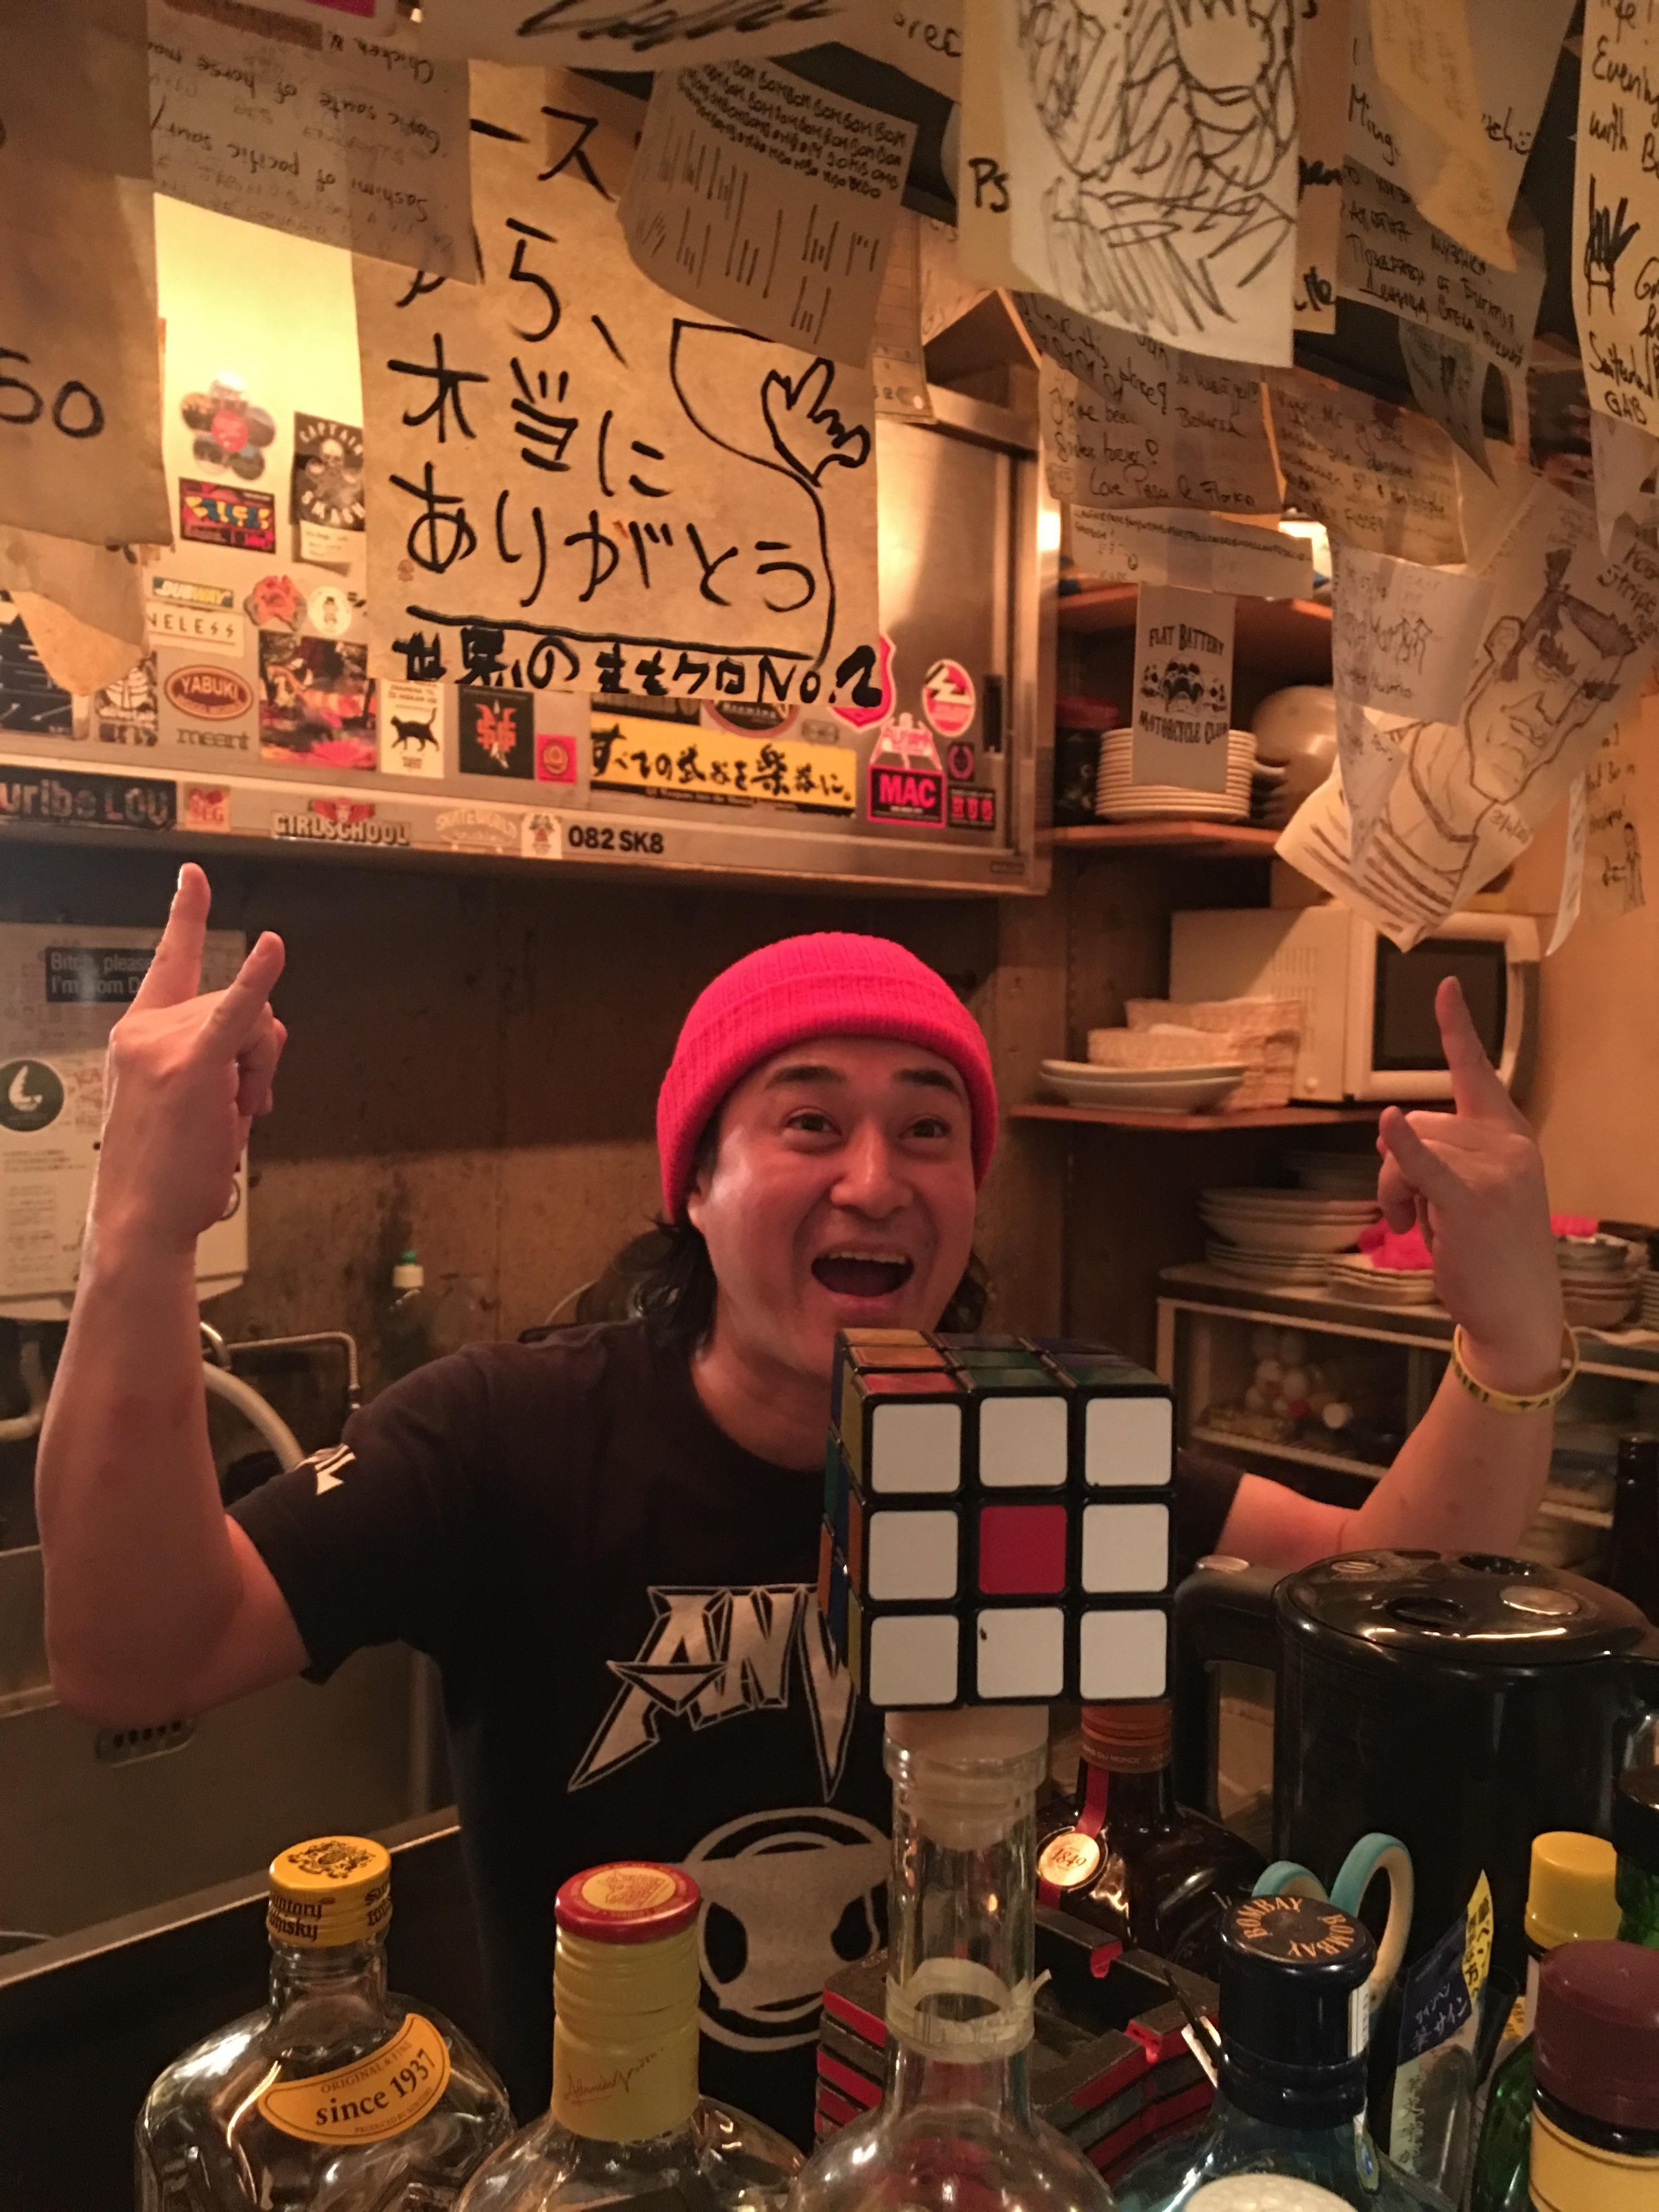 We asked this Japanese guy if he could complete the Rubik's cube in his bar. 24 seconds later.